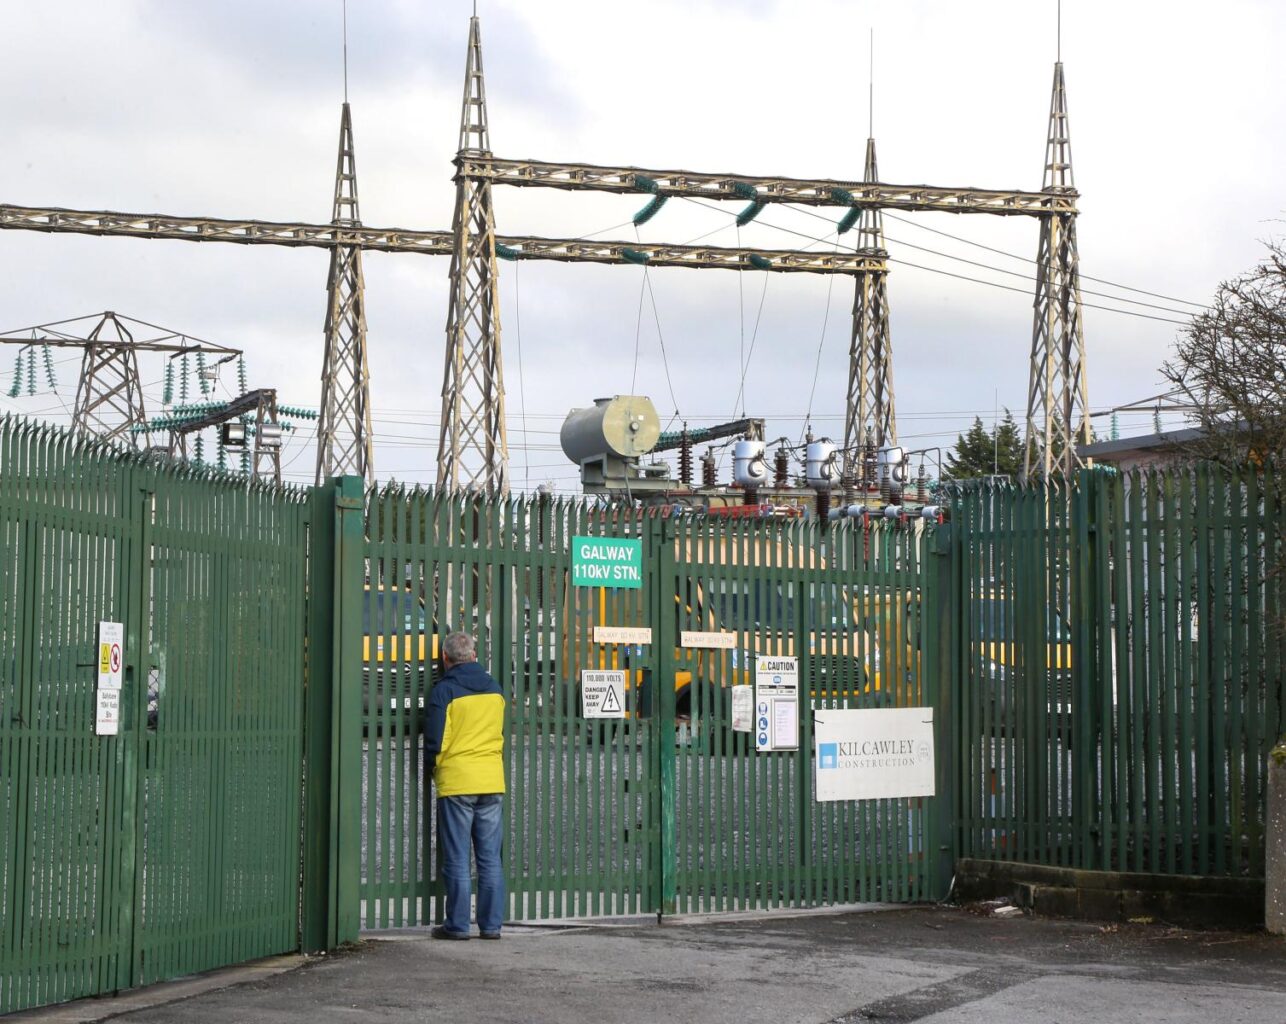 Decommissioned generator at core of power cut chaos